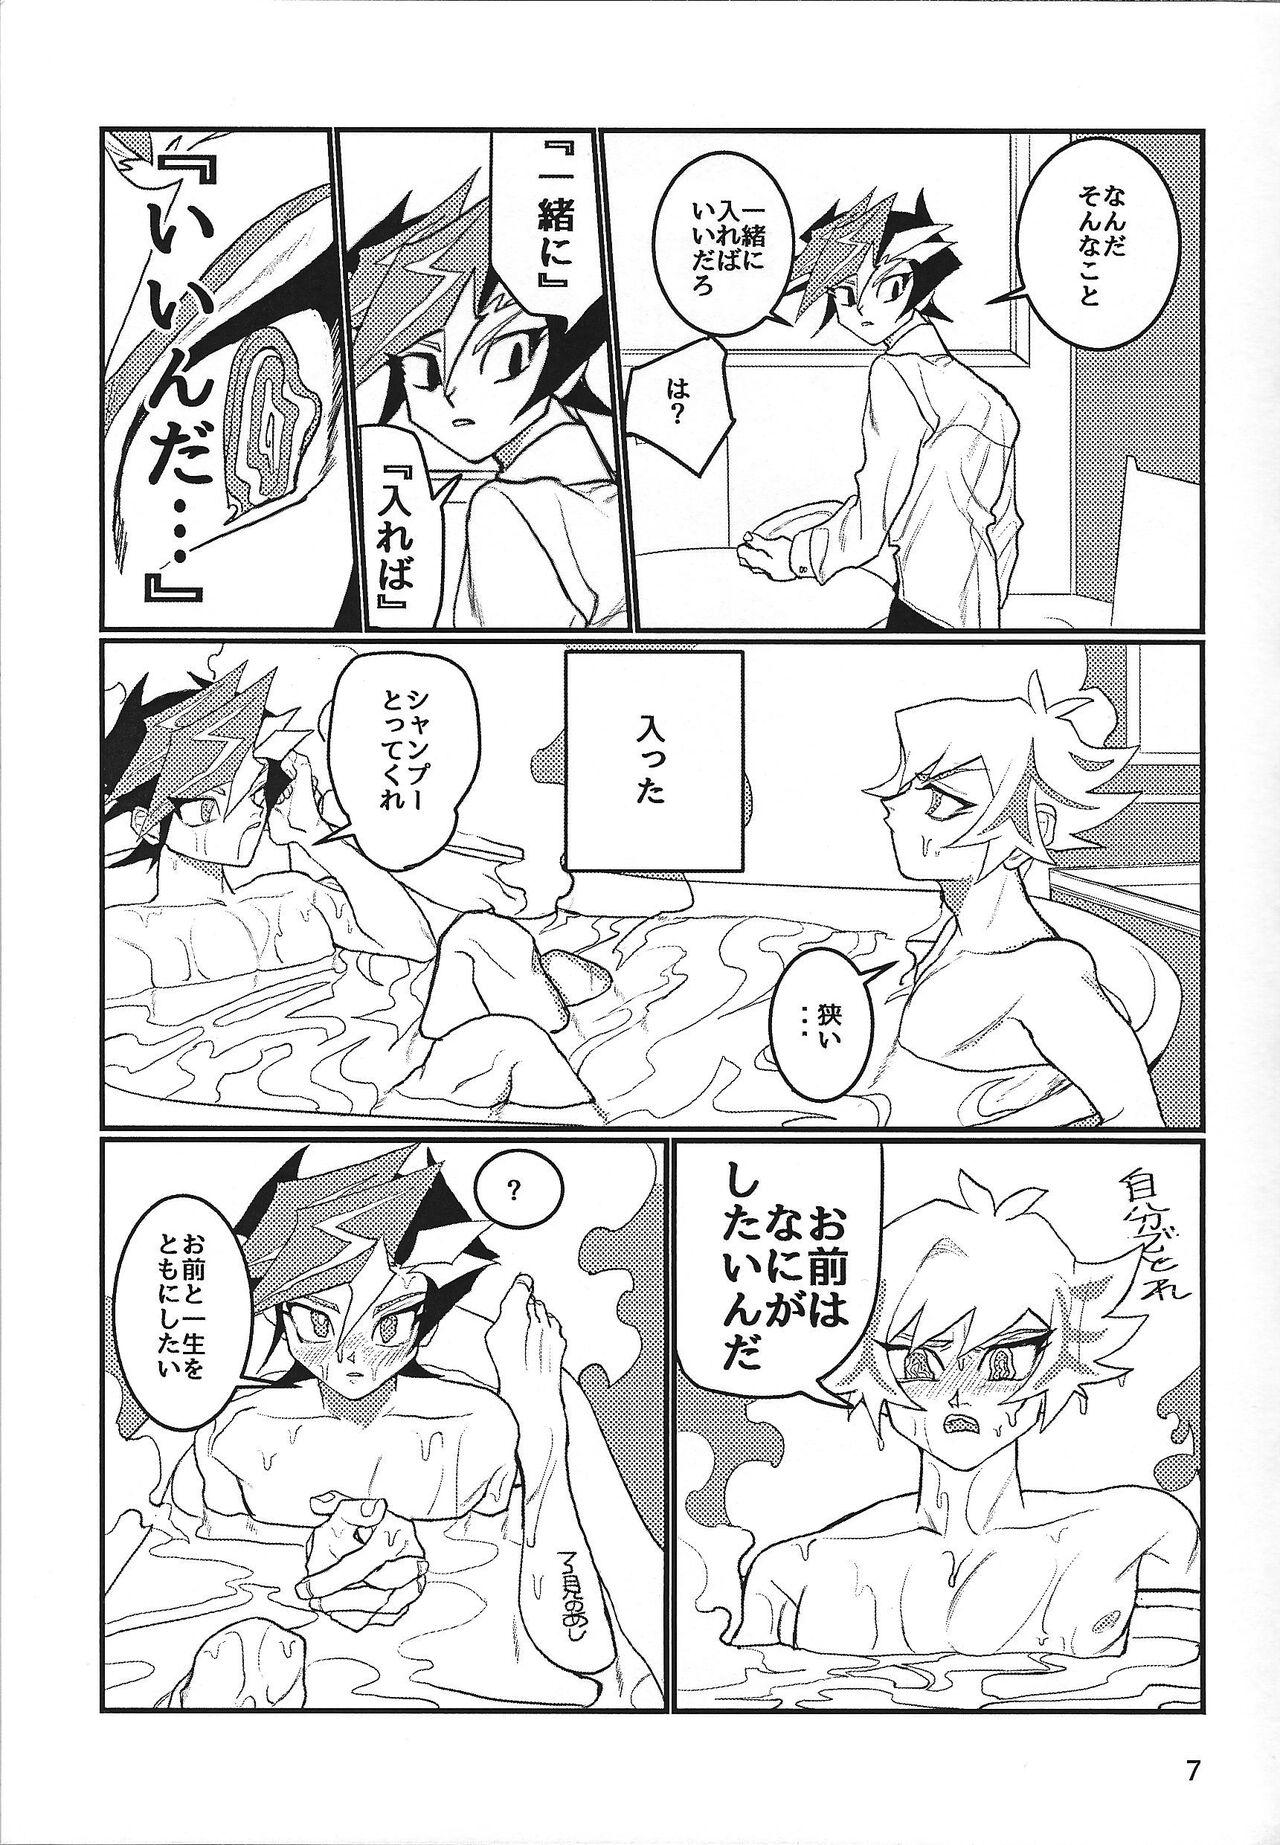 Celebrity Nudes LOTUS - Yu-gi-oh vrains Massages - Page 8